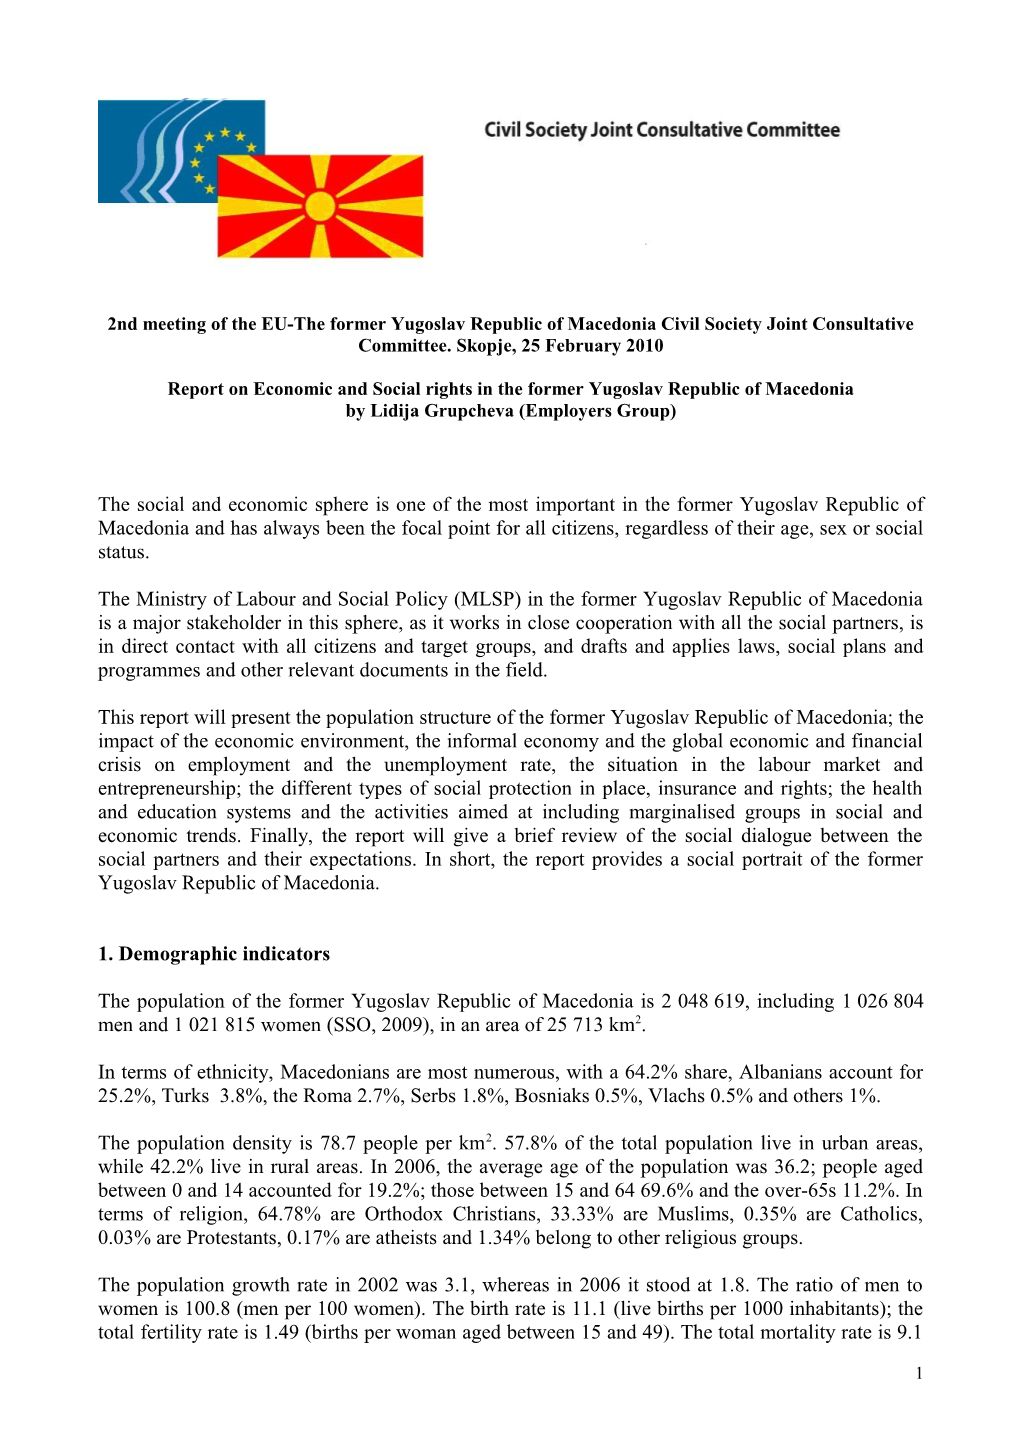 Report on Economic and Social Rights in the Former Yugoslav Republic of Macedonia